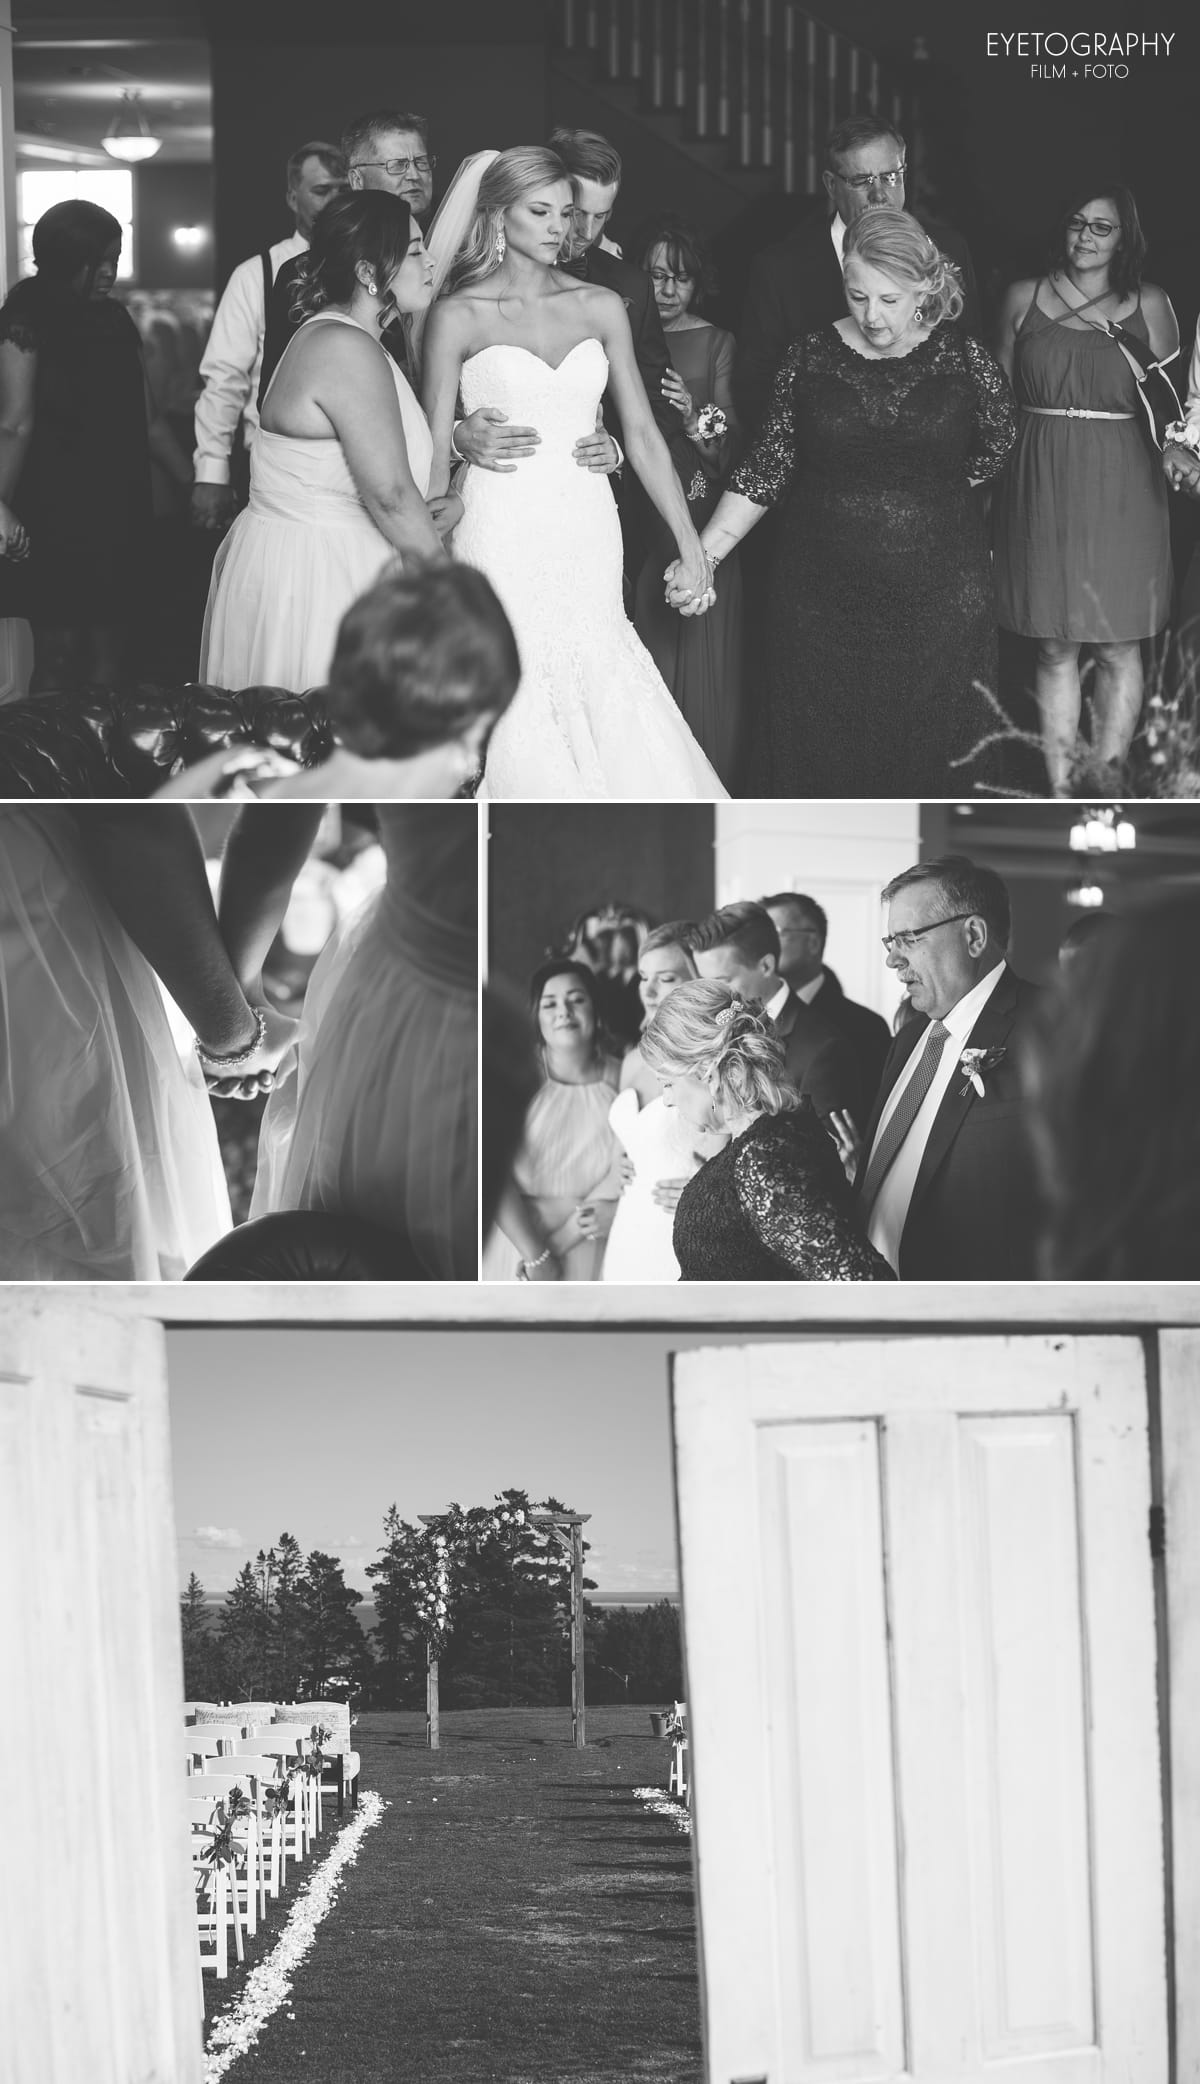 Duluth Minnesota Wedding Photography | Northland Country Club | Eyetography Film + Foto | Kendra + Mike 8